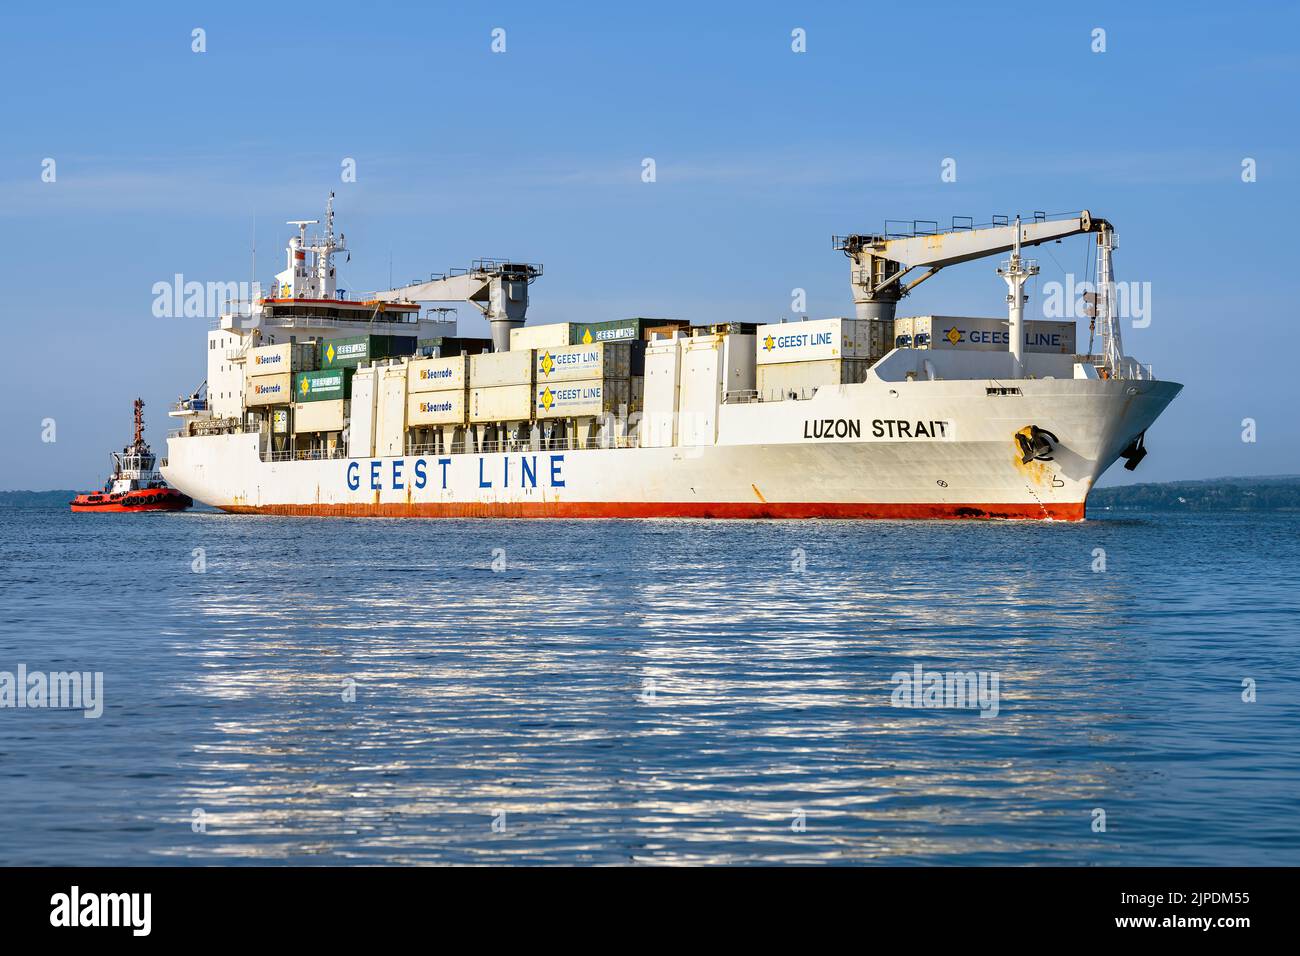 Luzon Strait is a reefer designed to carry refrigerated cargoes in pallets or cages. It is operated by Geest Line, part of the Seatrade Group. Stock Photo